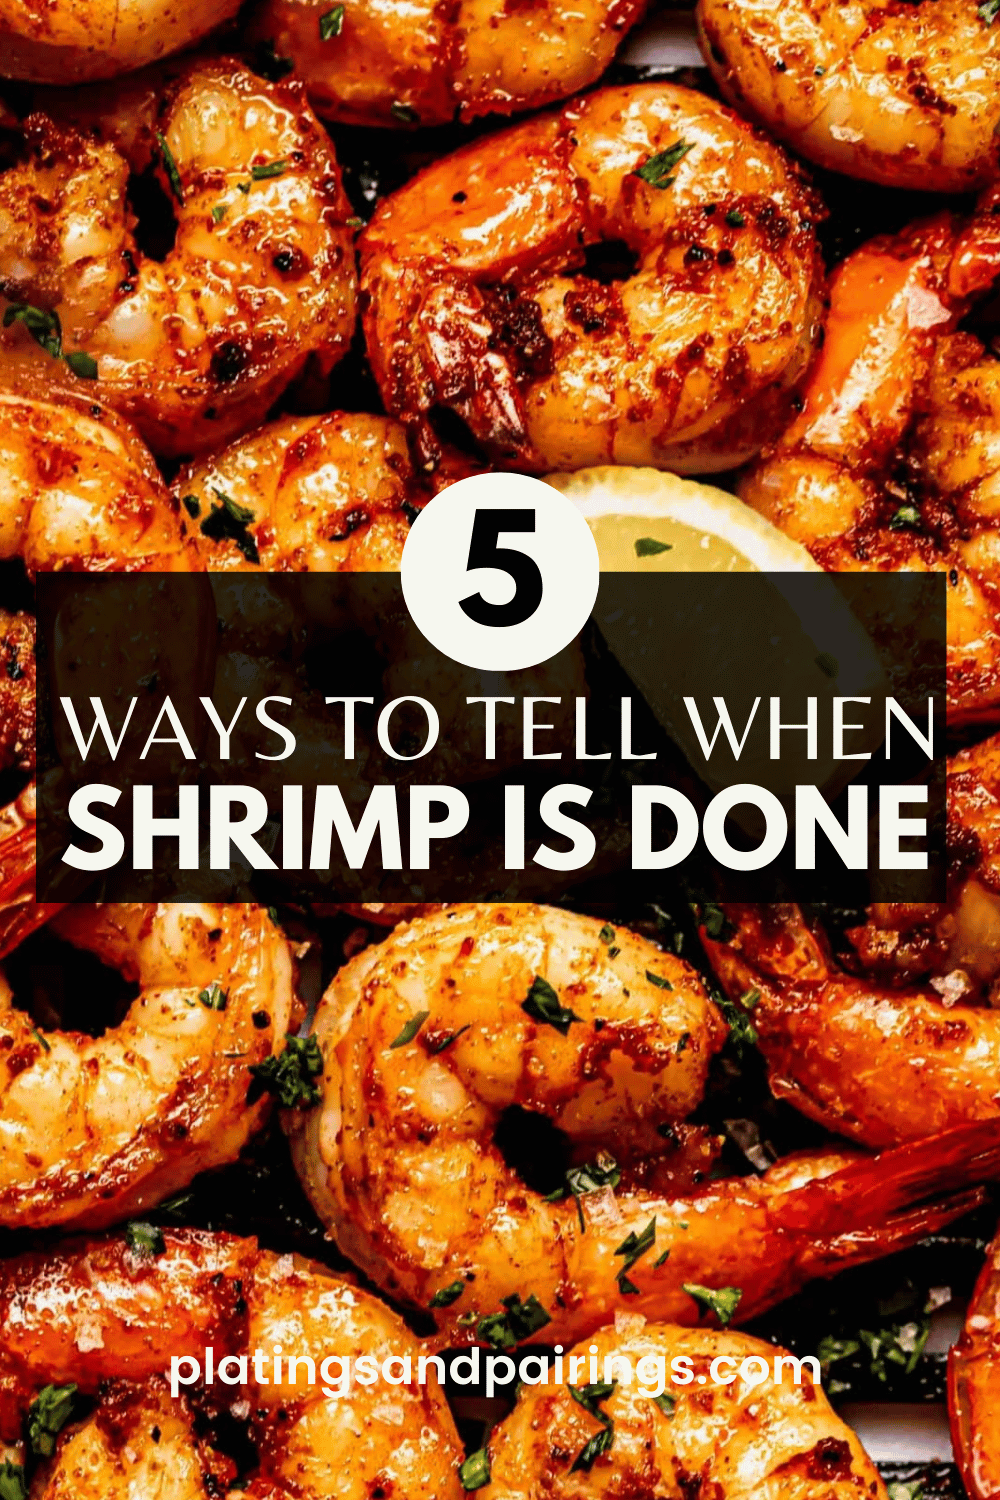 Cover image on how to tell when shrimp is done.